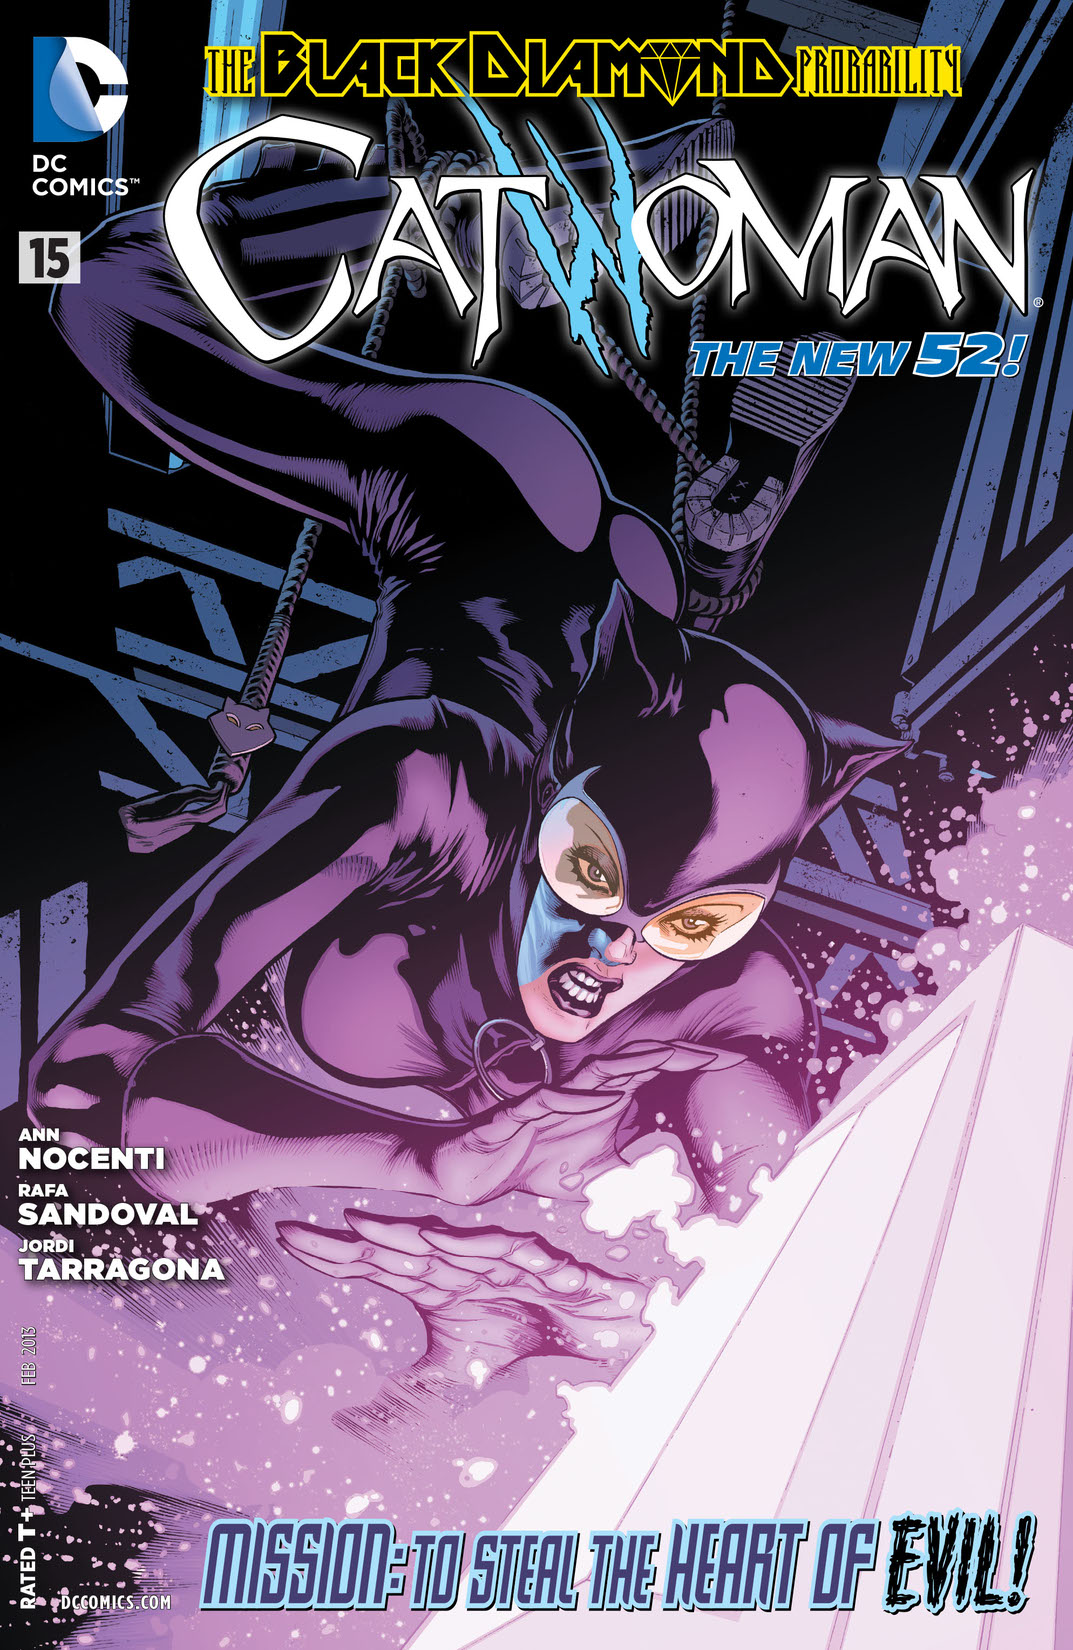 Catwoman (2011-) #15 preview images